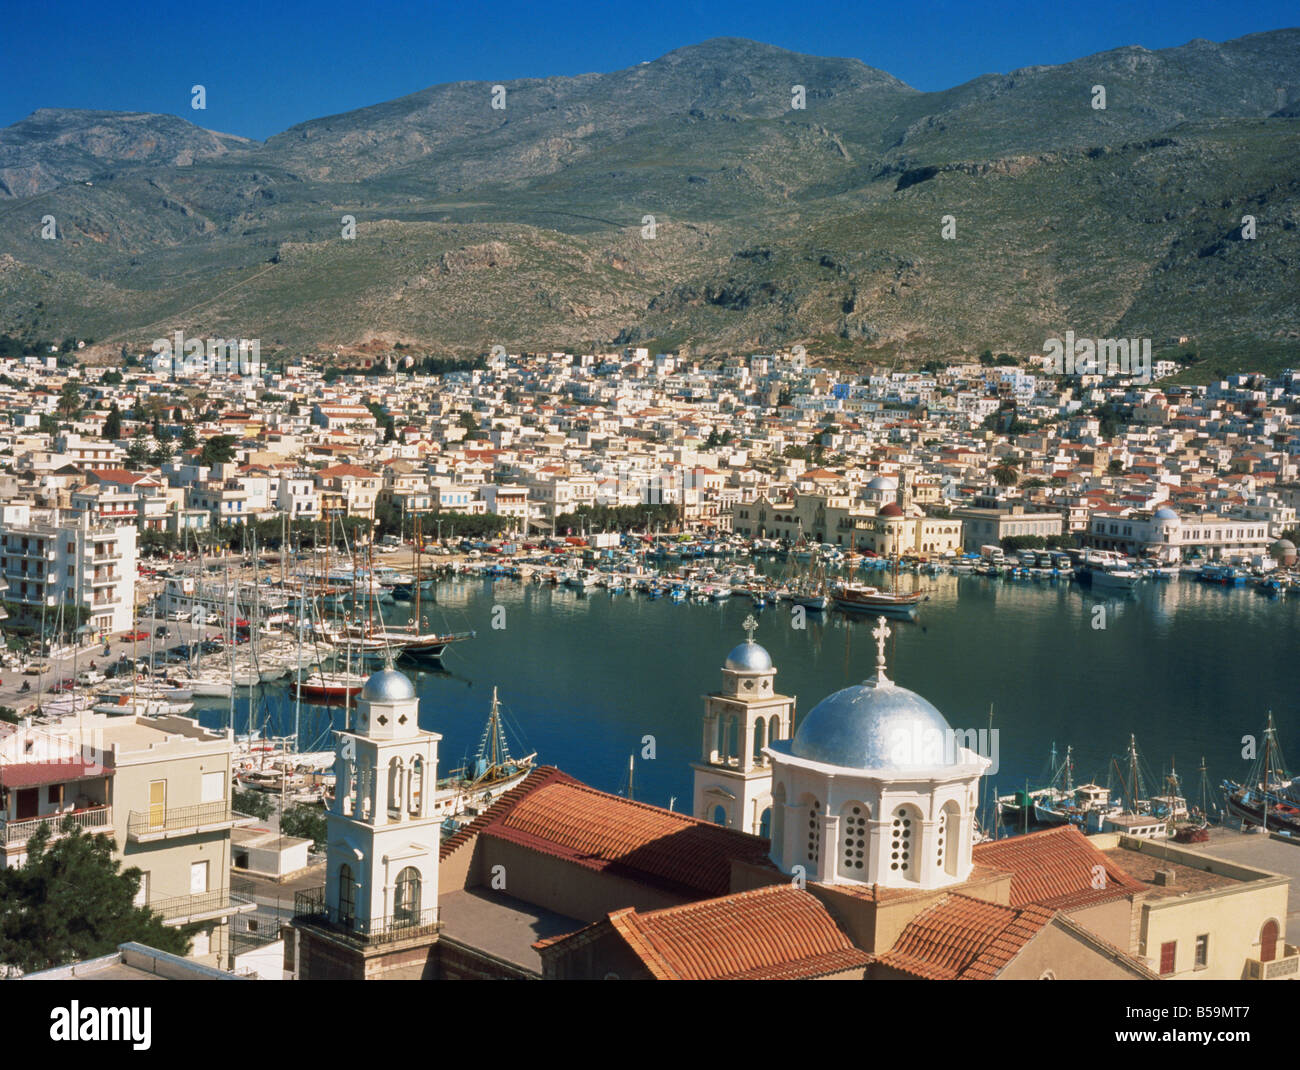 General view of port, Kalimnos, Dodecanese Islands, Greek Islands, Greece, Europe Stock Photo